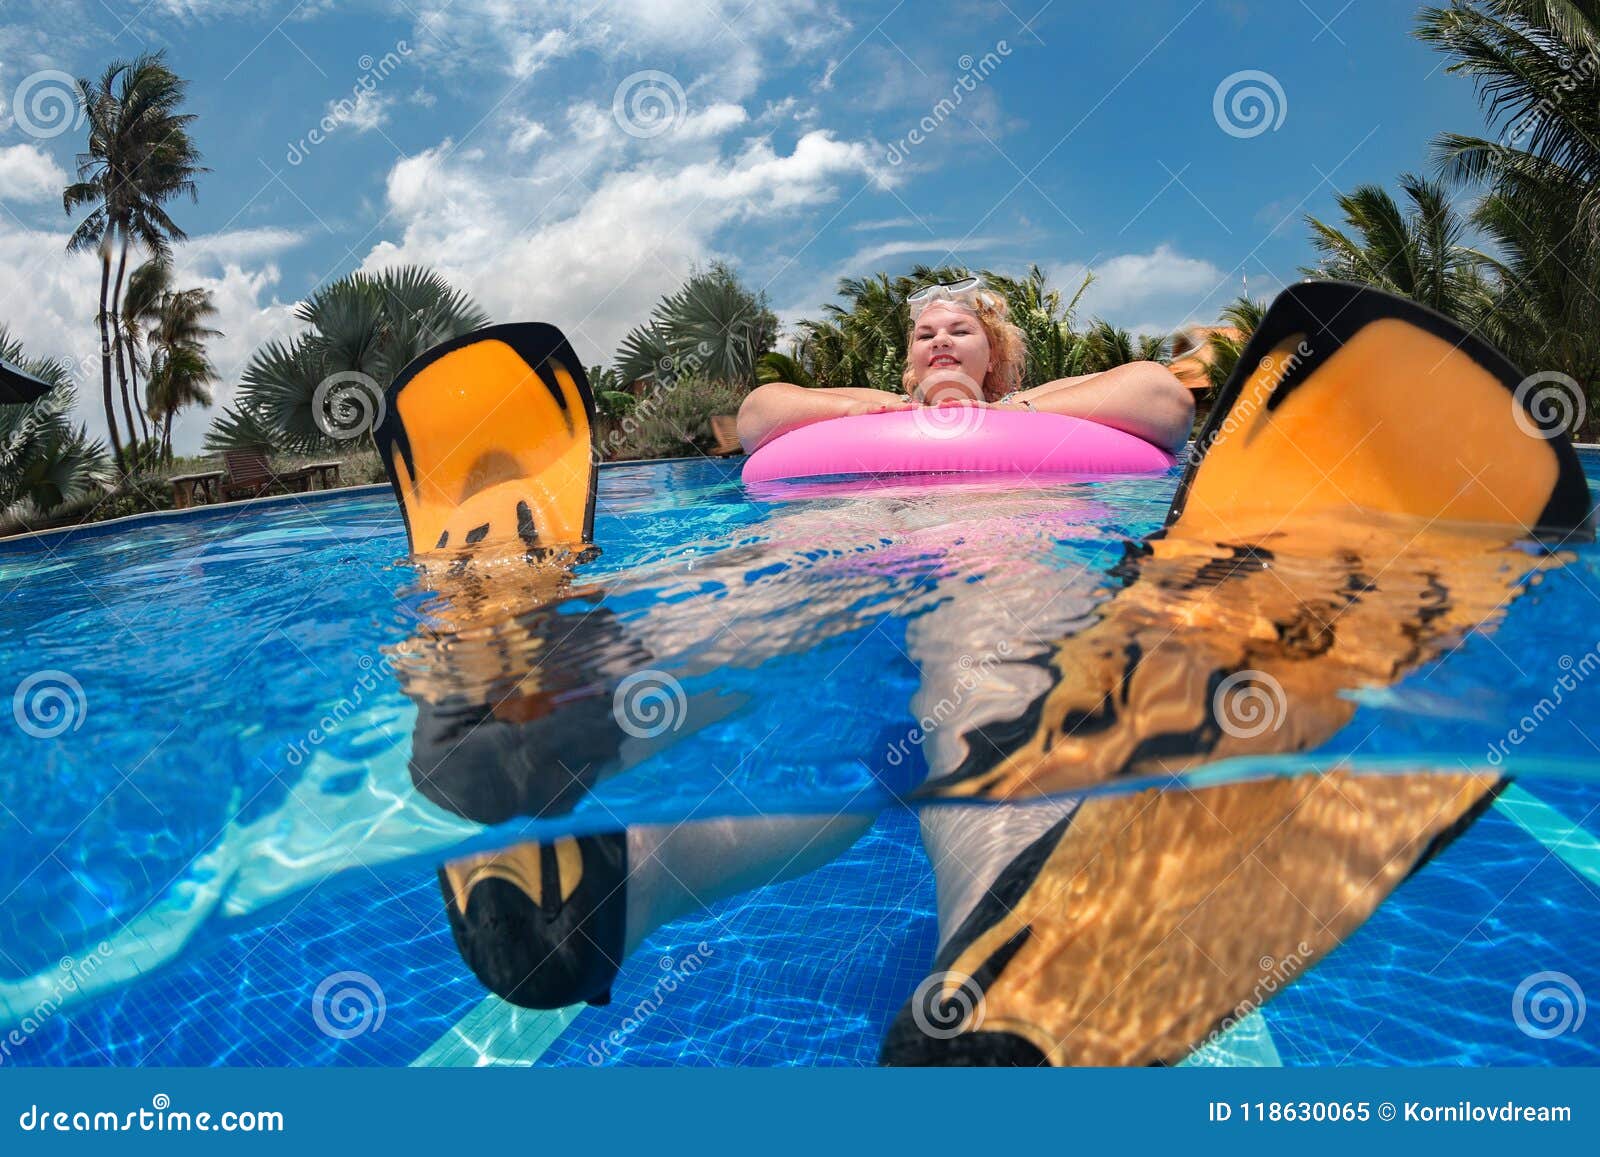 Portrait of plump young woman relaxing in swimming pool - a